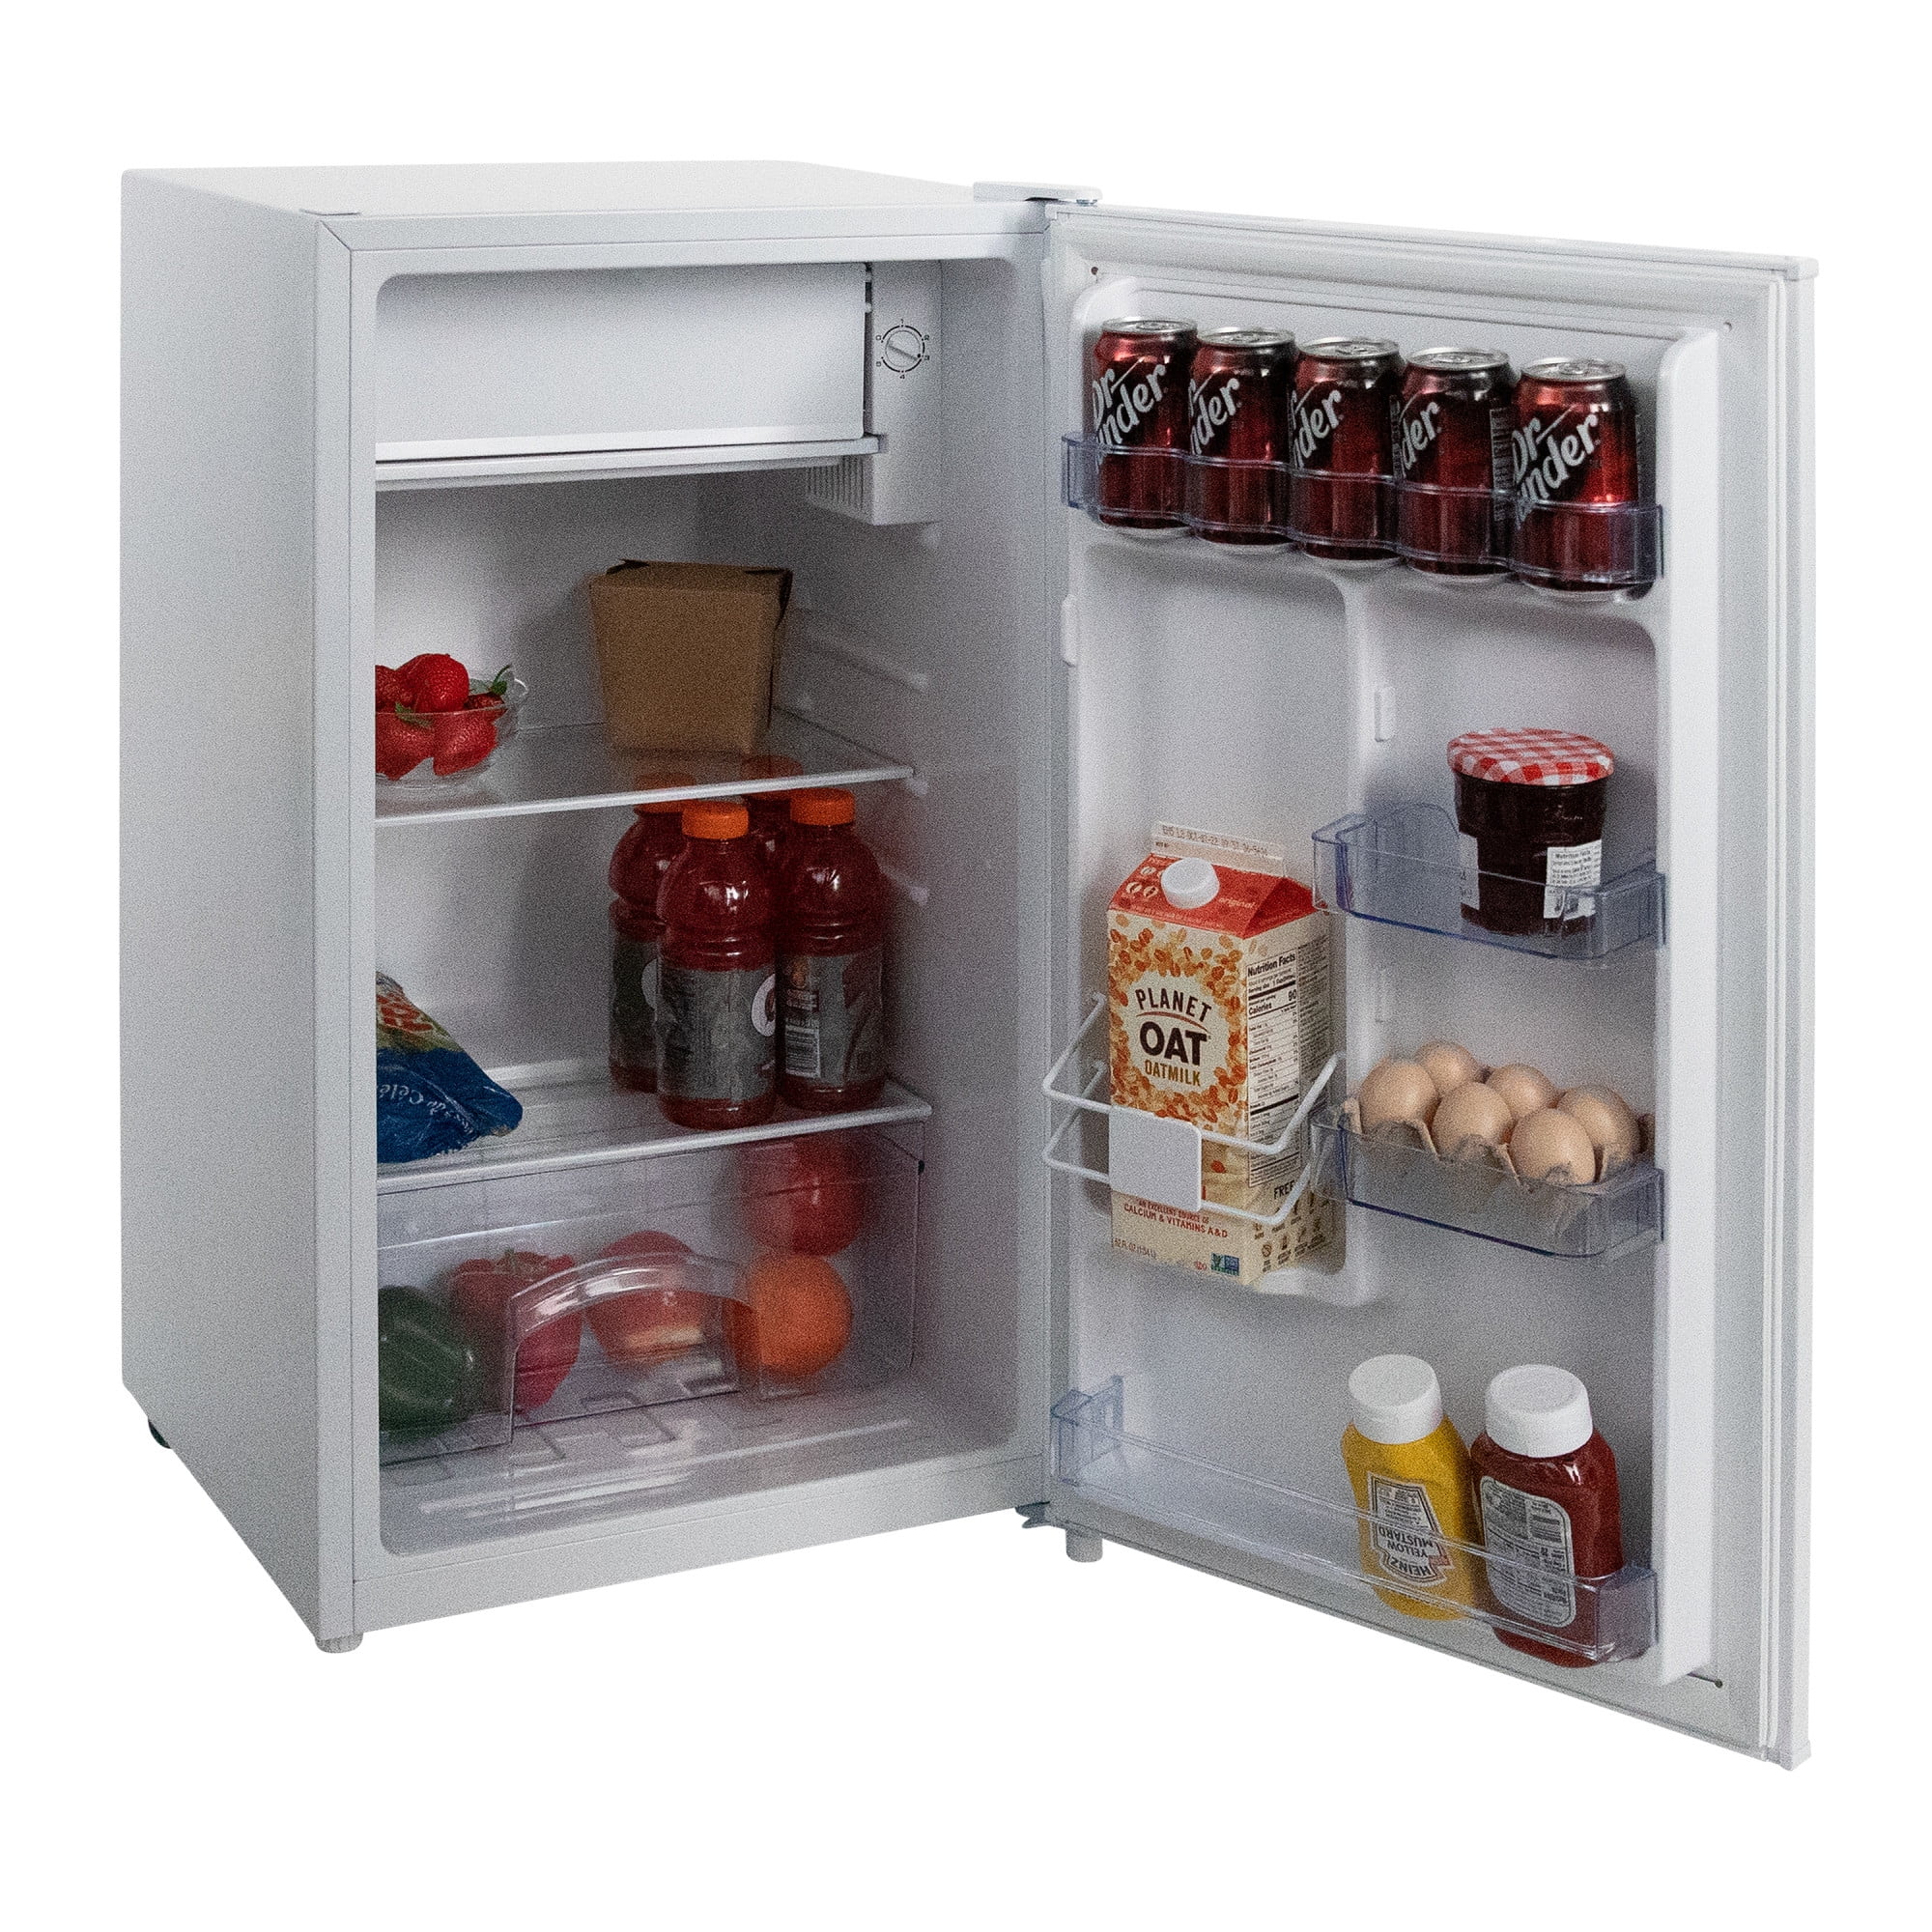  West Bend WBR44W Mini Fridge Compact Refrigerator for Home  Office or Dorm, with Reversible Door, Energy Star Rated, 4.4 Cubic Feet,  White : Everything Else